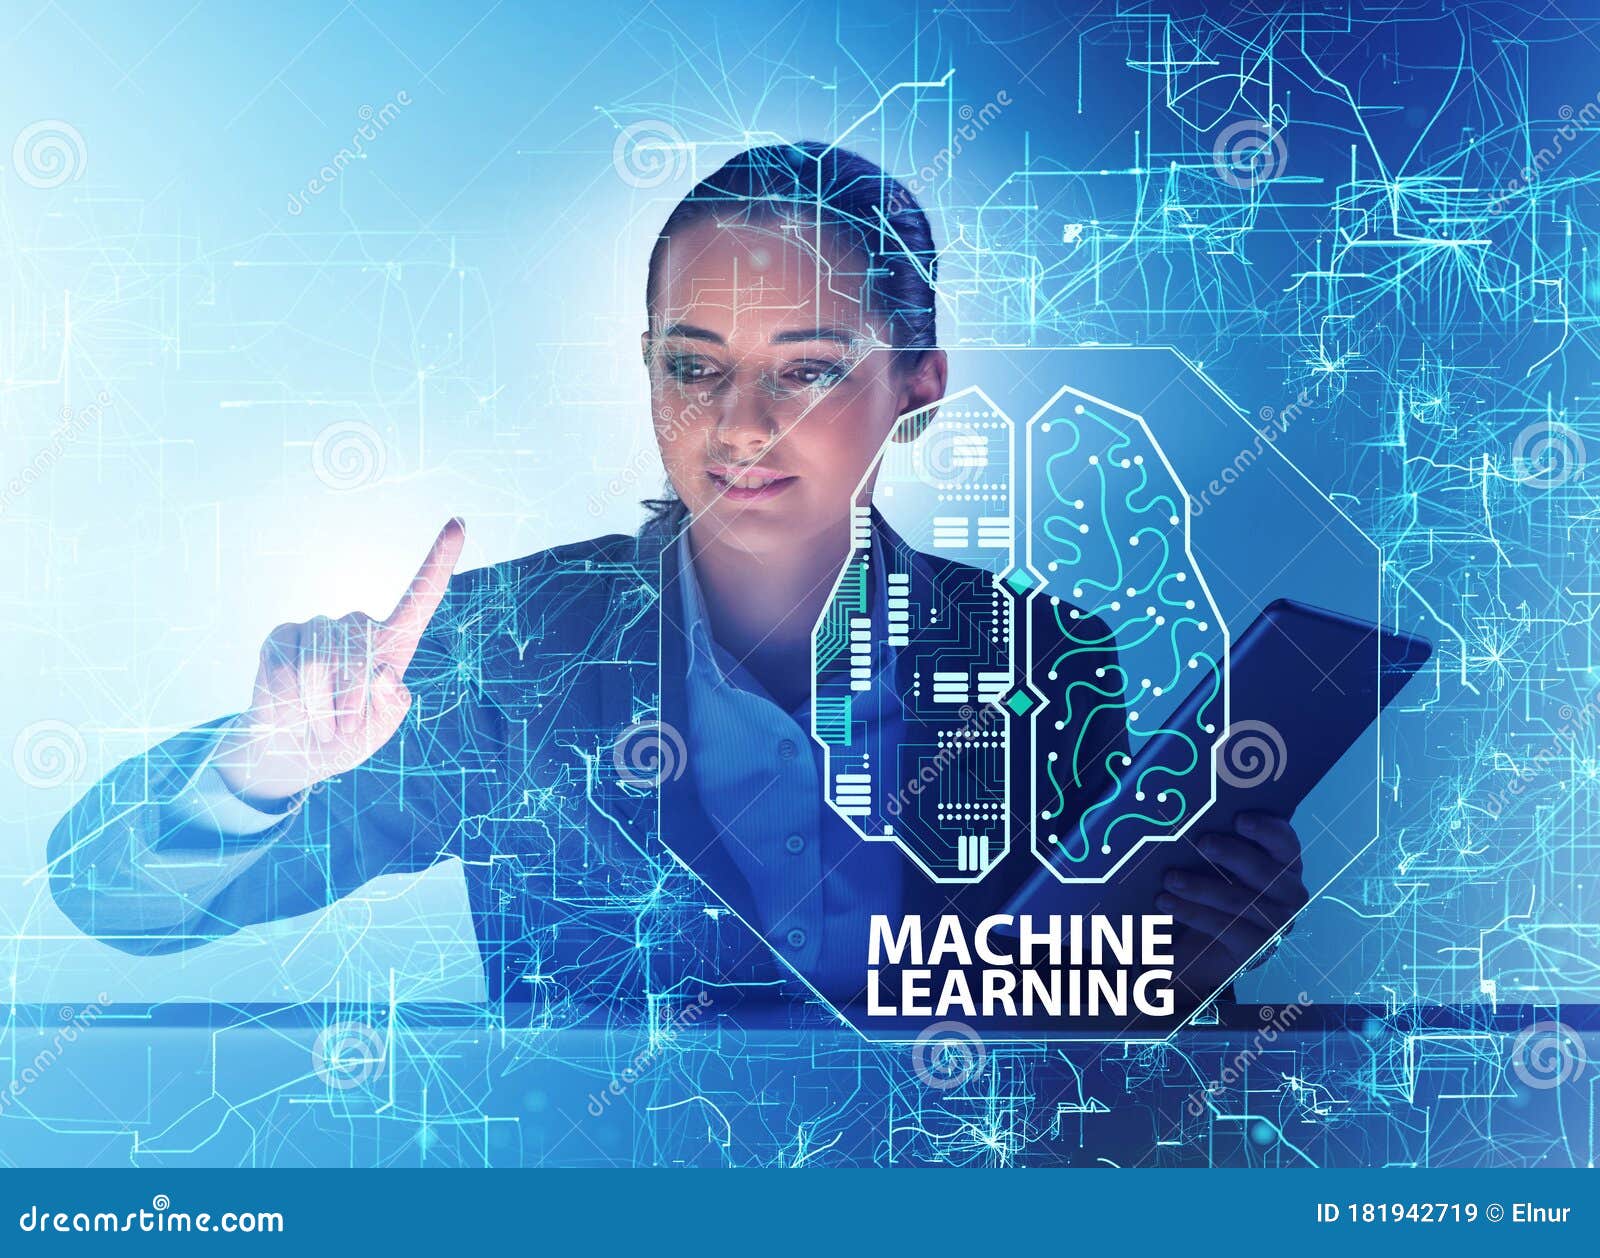 Machine Learning Concept As Modern Technology Stock Image ...